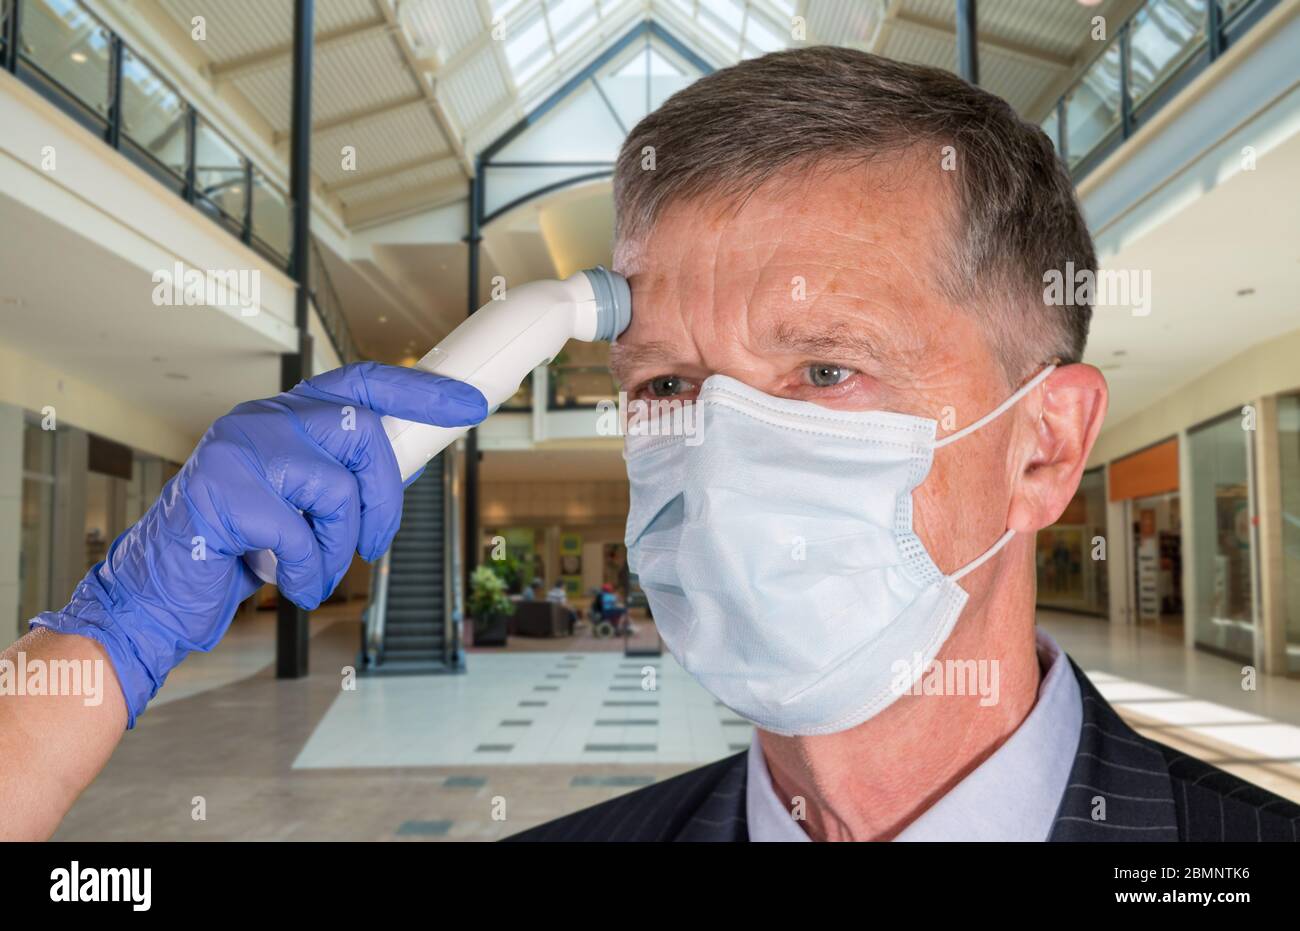 Mockup of shopping mall with senior adult wearing mask having a fever or temperature test taken to check coronavirus status Stock Photo